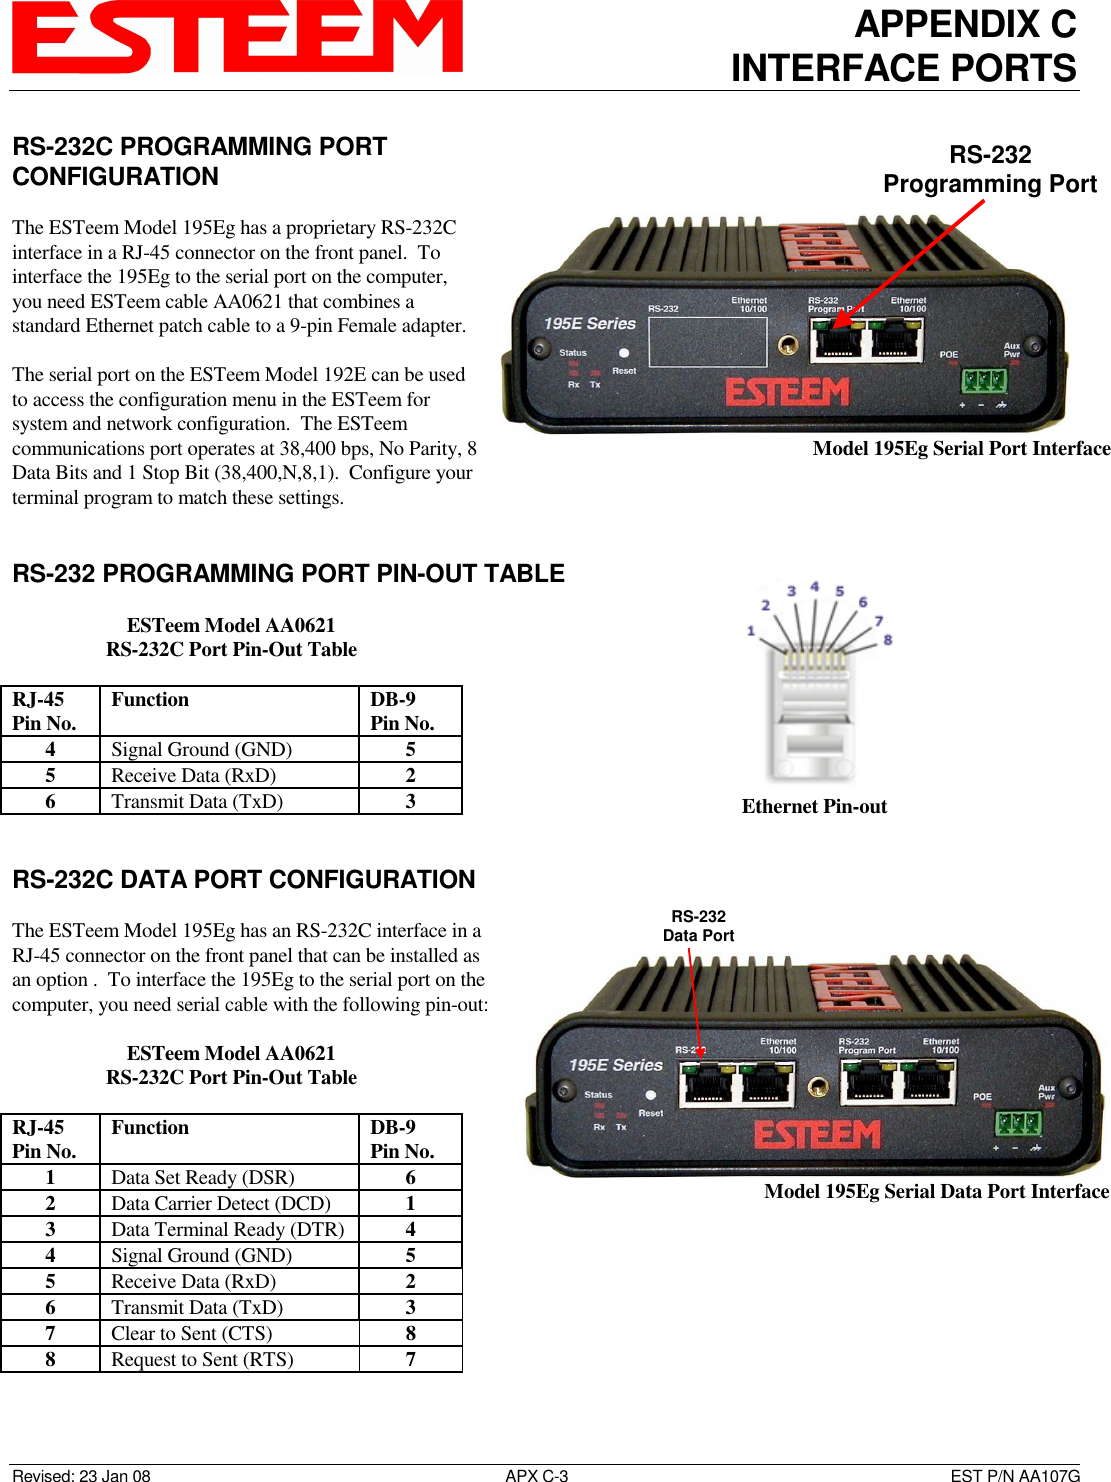 APPENDIX C INTERFACE PORTS   Revised: 23 Jan 08  APX C-3  EST P/N AA107G RS-232C PROGRAMMING PORT CONFIGURATION  The ESTeem Model 195Eg has a proprietary RS-232C interface in a RJ-45 connector on the front panel.  To interface the 195Eg to the serial port on the computer, you need ESTeem cable AA0621 that combines a standard Ethernet patch cable to a 9-pin Female adapter.  The serial port on the ESTeem Model 192E can be used to access the configuration menu in the ESTeem for system and network configuration.  The ESTeem communications port operates at 38,400 bps, No Parity, 8 Data Bits and 1 Stop Bit (38,400,N,8,1).  Configure your terminal program to match these settings.   RS-232 PROGRAMMING PORT PIN-OUT TABLE  ESTeem Model AA0621 RS-232C Port Pin-Out Table  RJ-45 Pin No.  Function  DB-9 Pin No. 4  Signal Ground (GND)  5 5  Receive Data (RxD)  2 6  Transmit Data (TxD)  3   RS-232C DATA PORT CONFIGURATION  The ESTeem Model 195Eg has an RS-232C interface in a RJ-45 connector on the front panel that can be installed as an option .  To interface the 195Eg to the serial port on the computer, you need serial cable with the following pin-out:  ESTeem Model AA0621 RS-232C Port Pin-Out Table  RJ-45 Pin No.  Function  DB-9 Pin No. 1  Data Set Ready (DSR)  6 2  Data Carrier Detect (DCD)  1 3  Data Terminal Ready (DTR)  4 4  Signal Ground (GND)  5 5  Receive Data (RxD)  2 6  Transmit Data (TxD)  3 7  Clear to Sent (CTS)  8 8  Request to Sent (RTS)  7  RS-232Programming Port Model 195Eg Serial Port Interface  Ethernet Pin-out RS-232Data Port Model 195Eg Serial Data Port Interface 